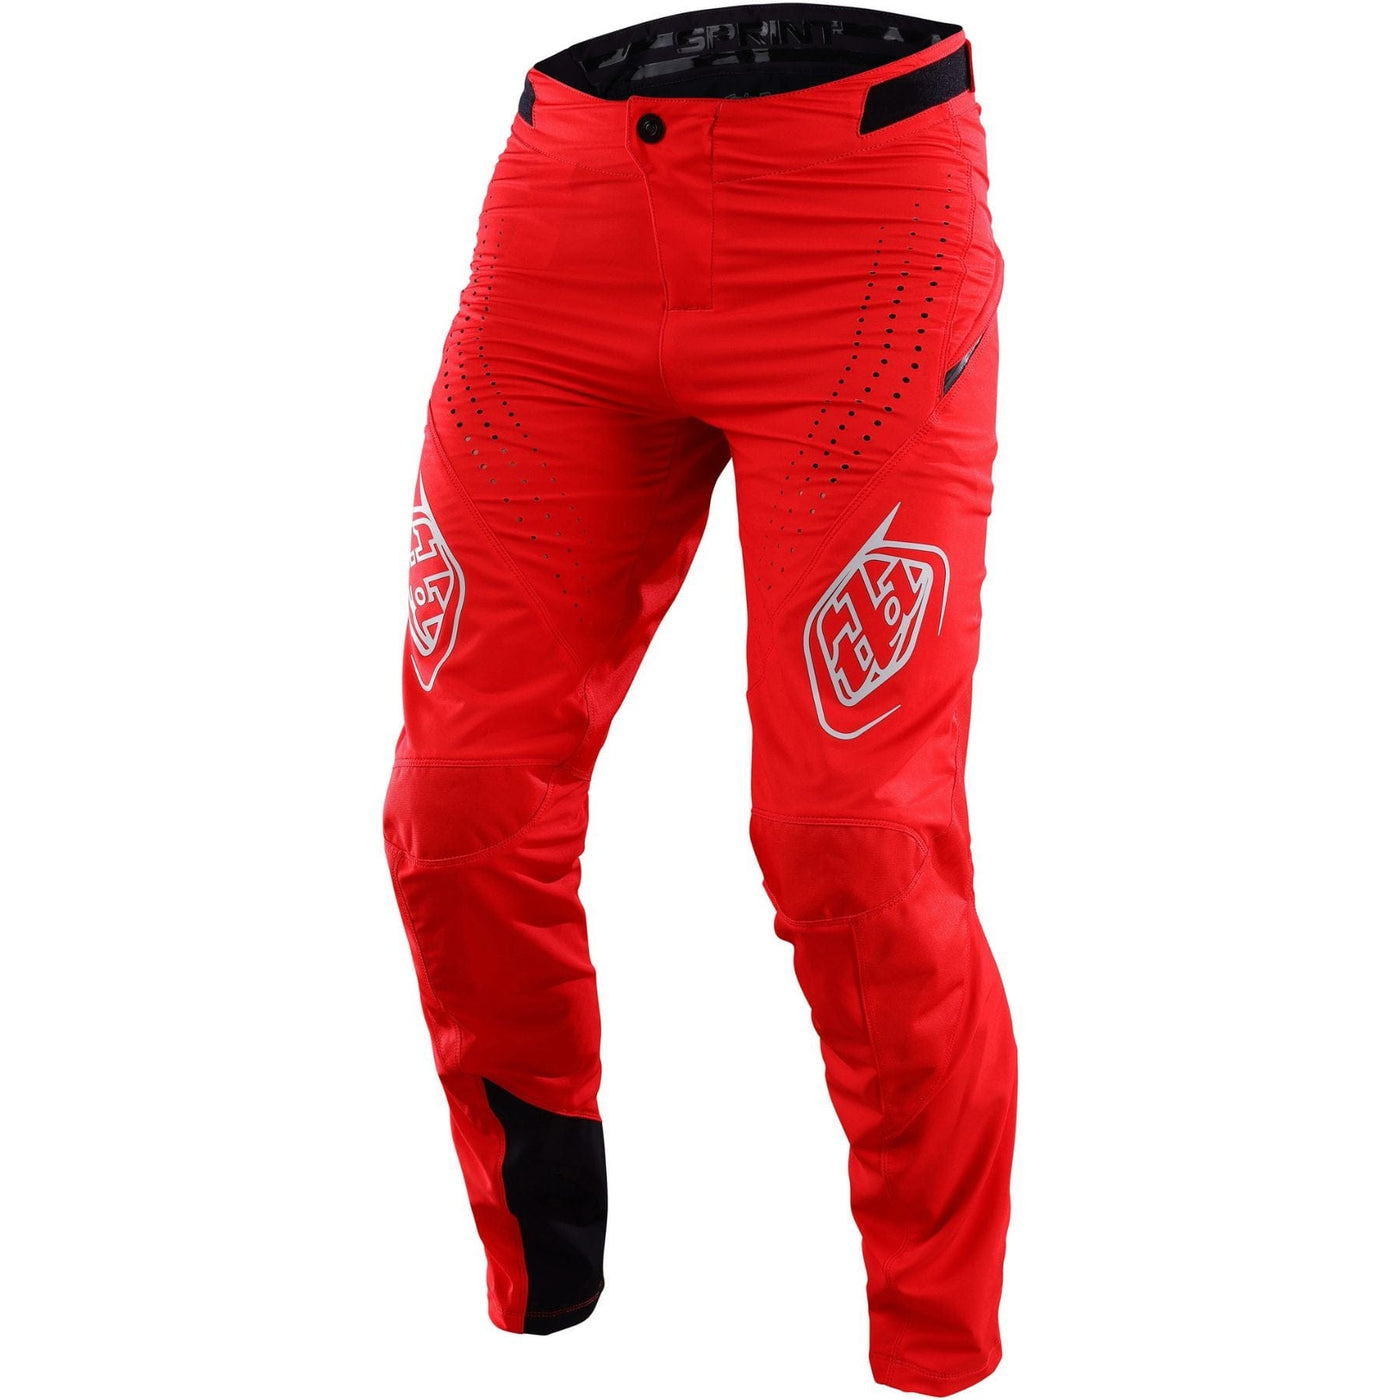 Troy Lee Designs Sprint Pants Mono - Race Red 8Lines Shop - Fast Shipping